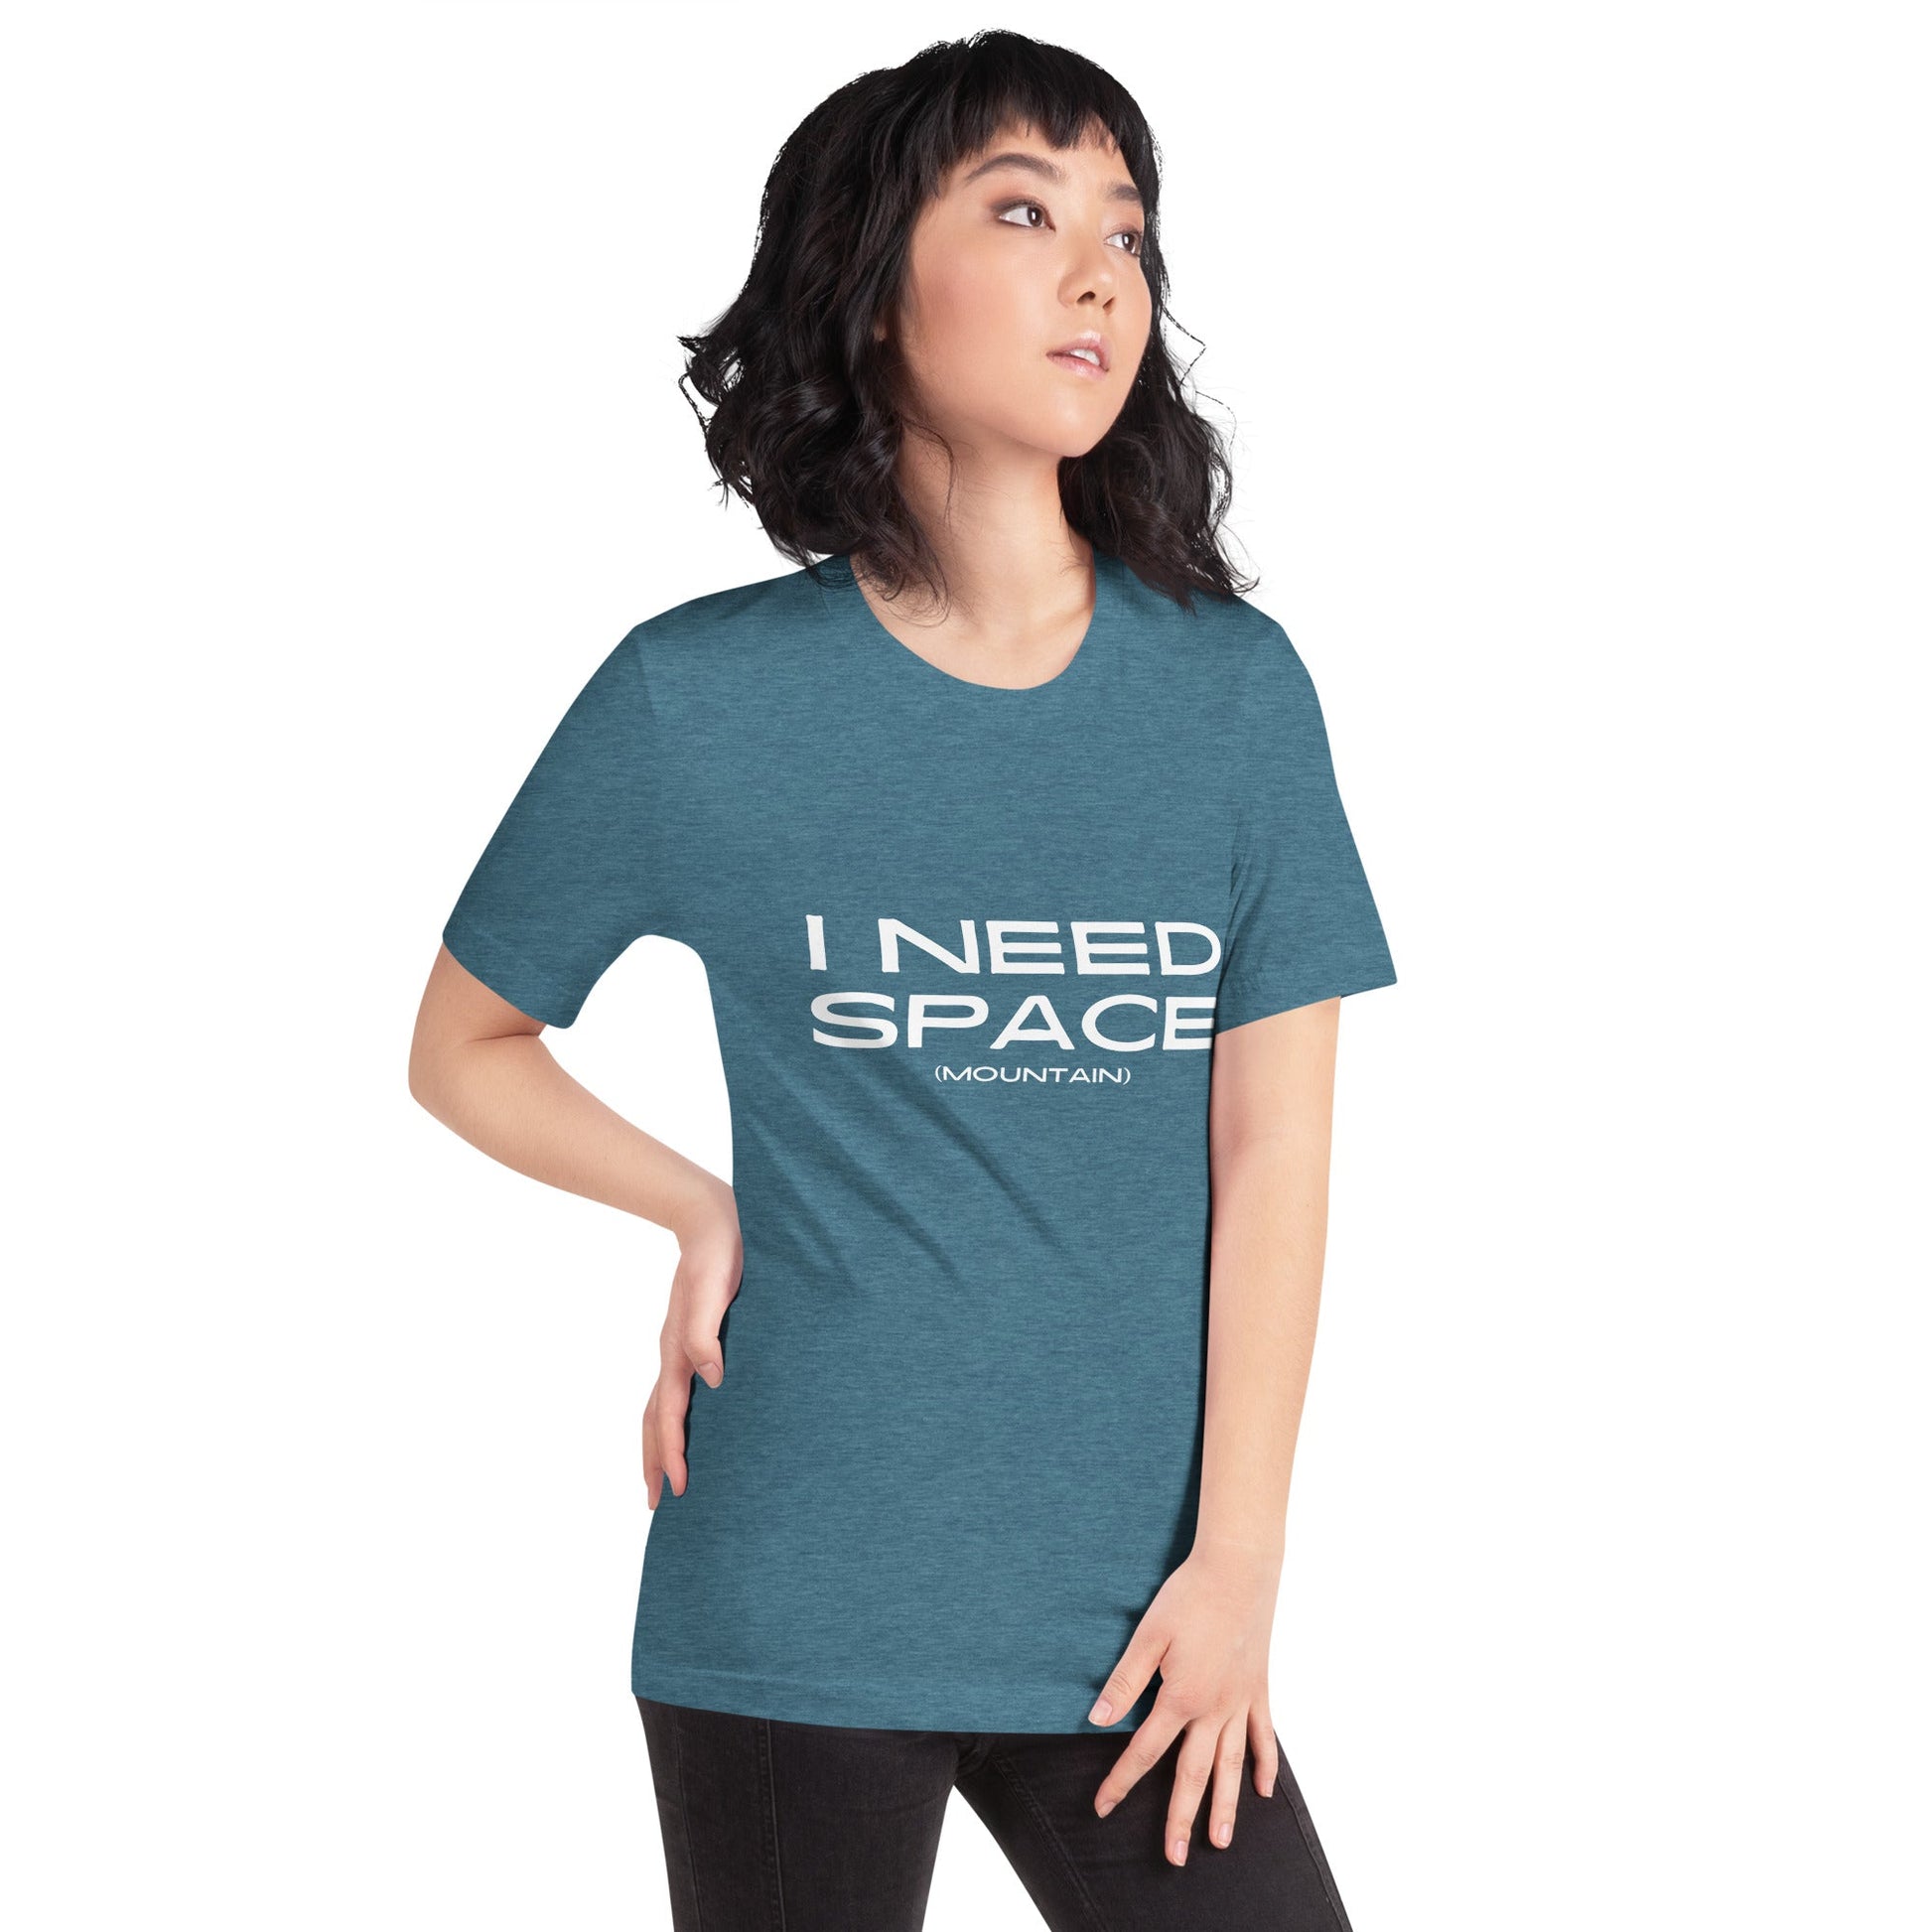 I Need Space Unisex t-shirt adult topschristmas gift ideasAdult T-ShirtLittle Lady Shay Boutique